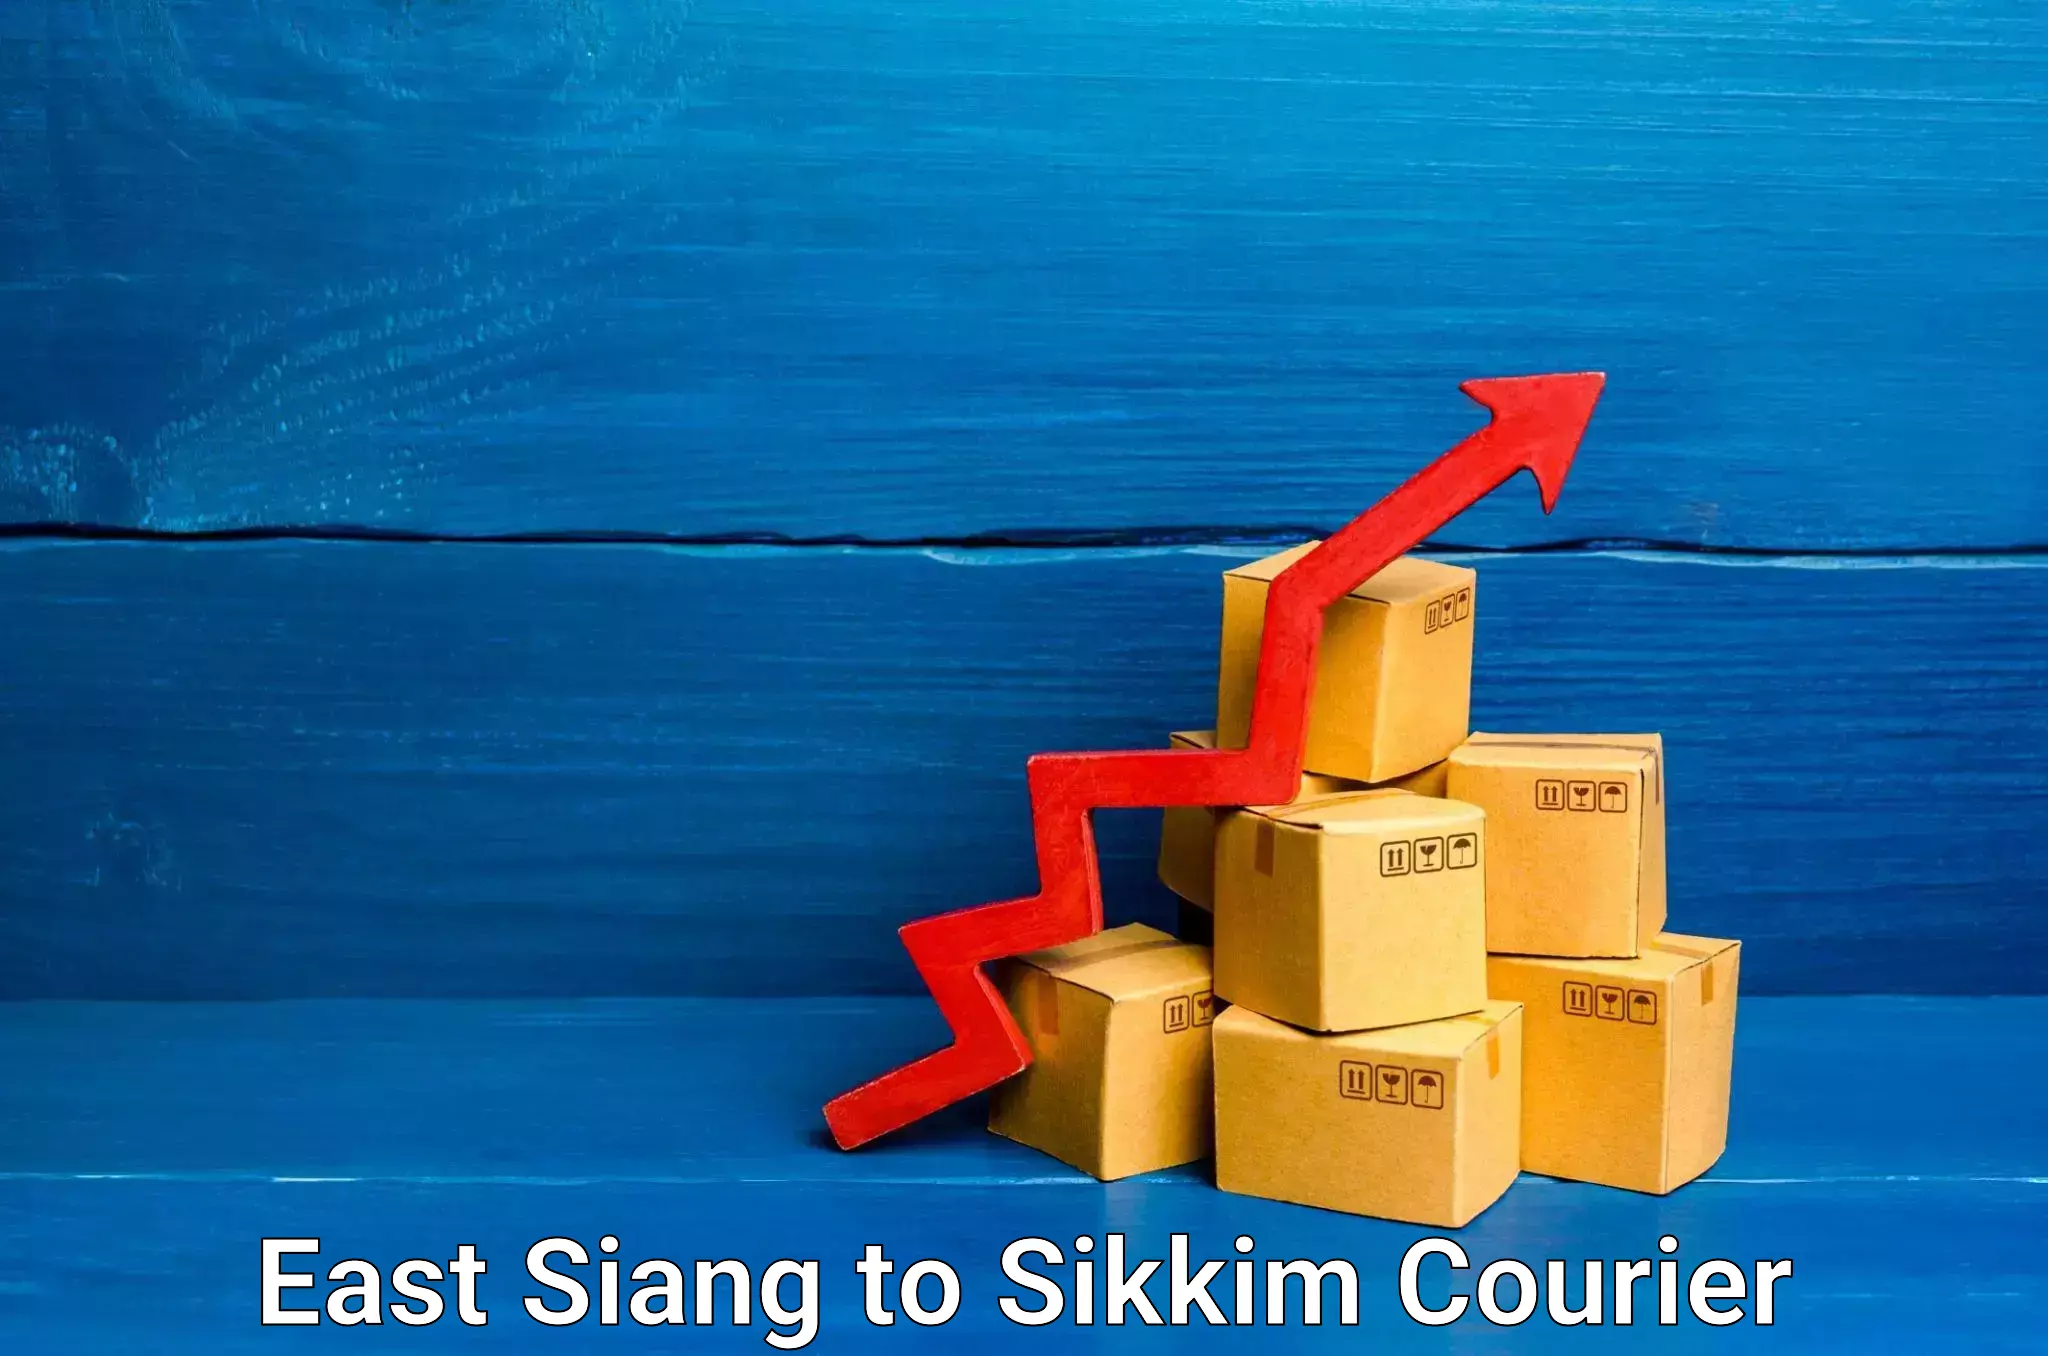 Express mail service East Siang to Sikkim